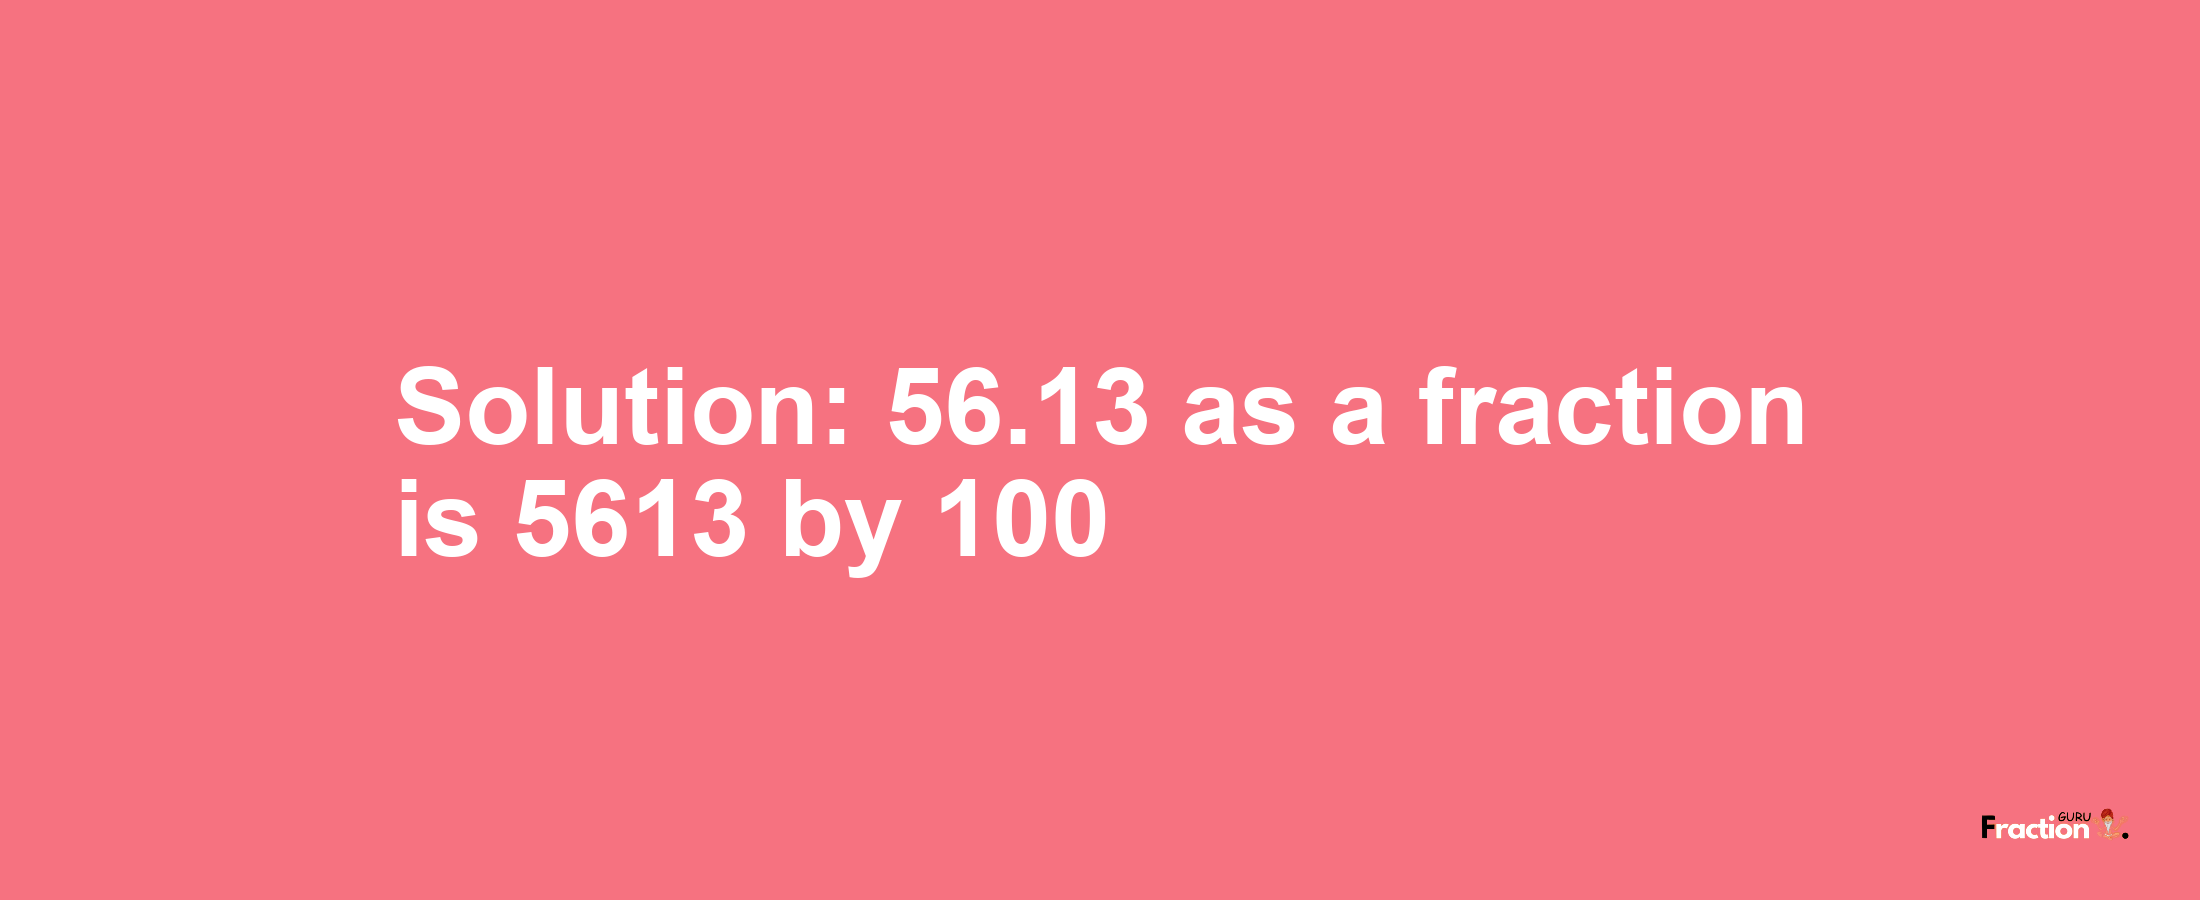 Solution:56.13 as a fraction is 5613/100